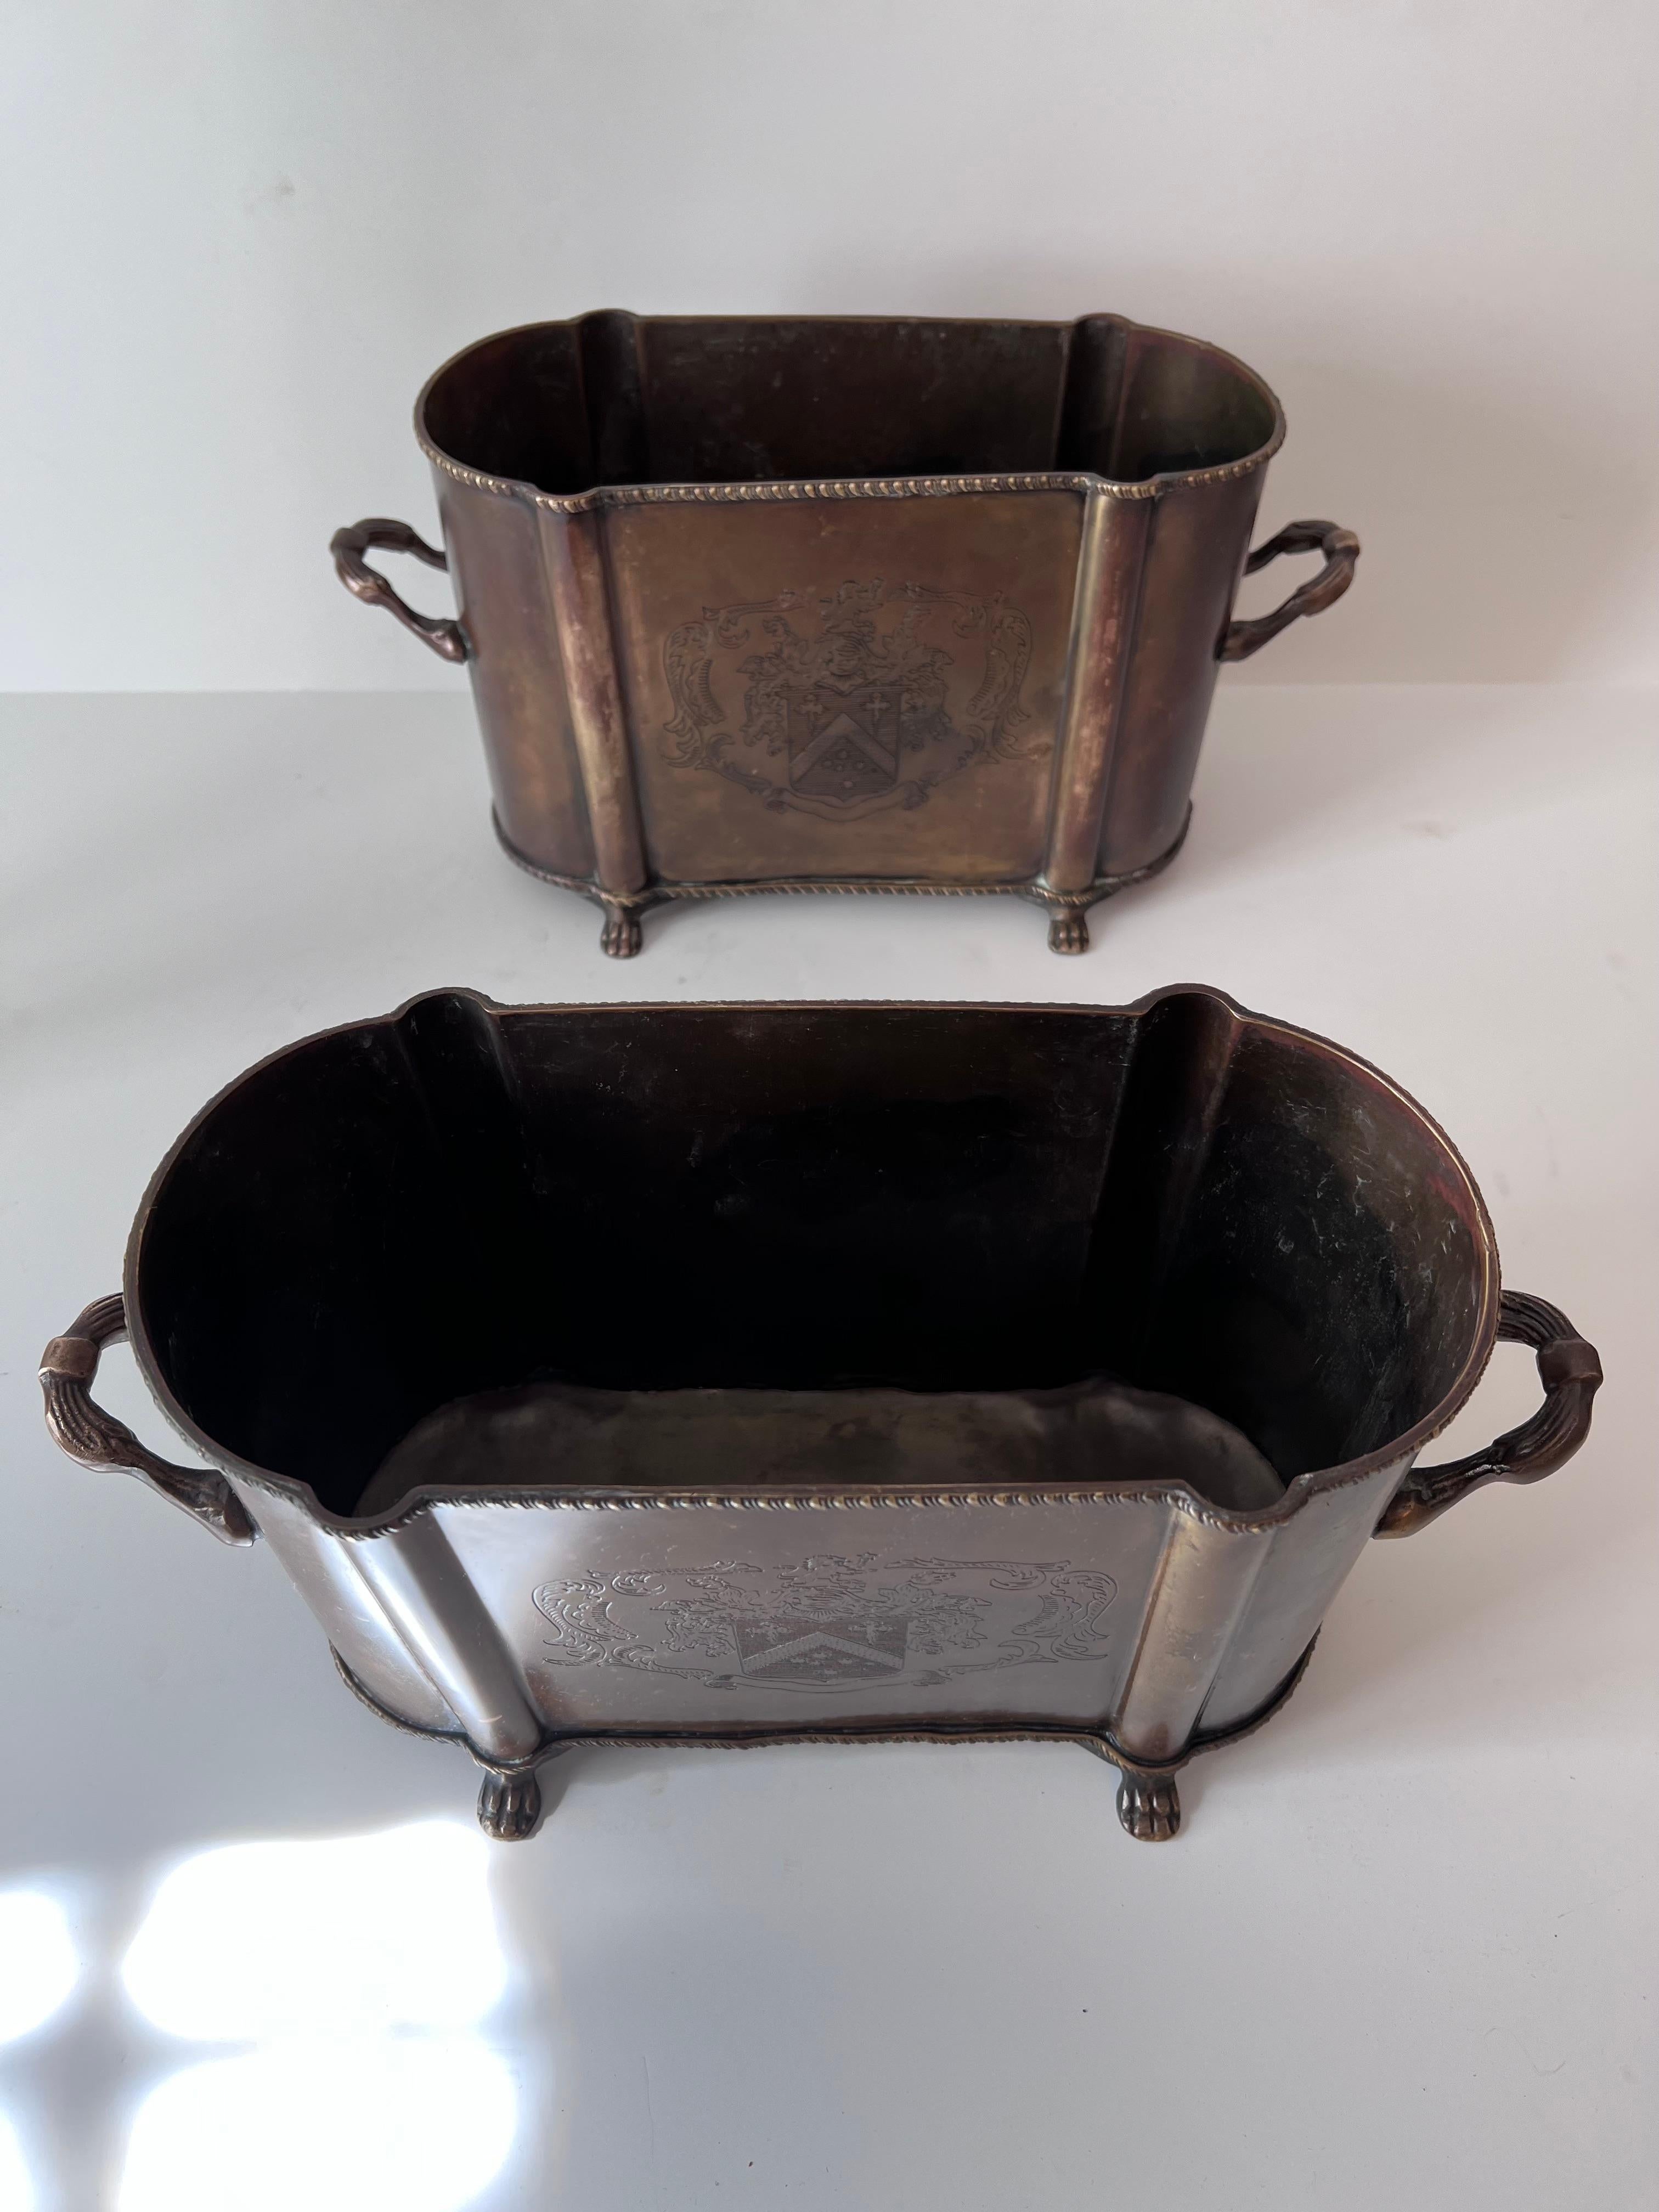 Pair of English Metal Cachepots or Jardinieres with Claw Feet and a Crest from 6